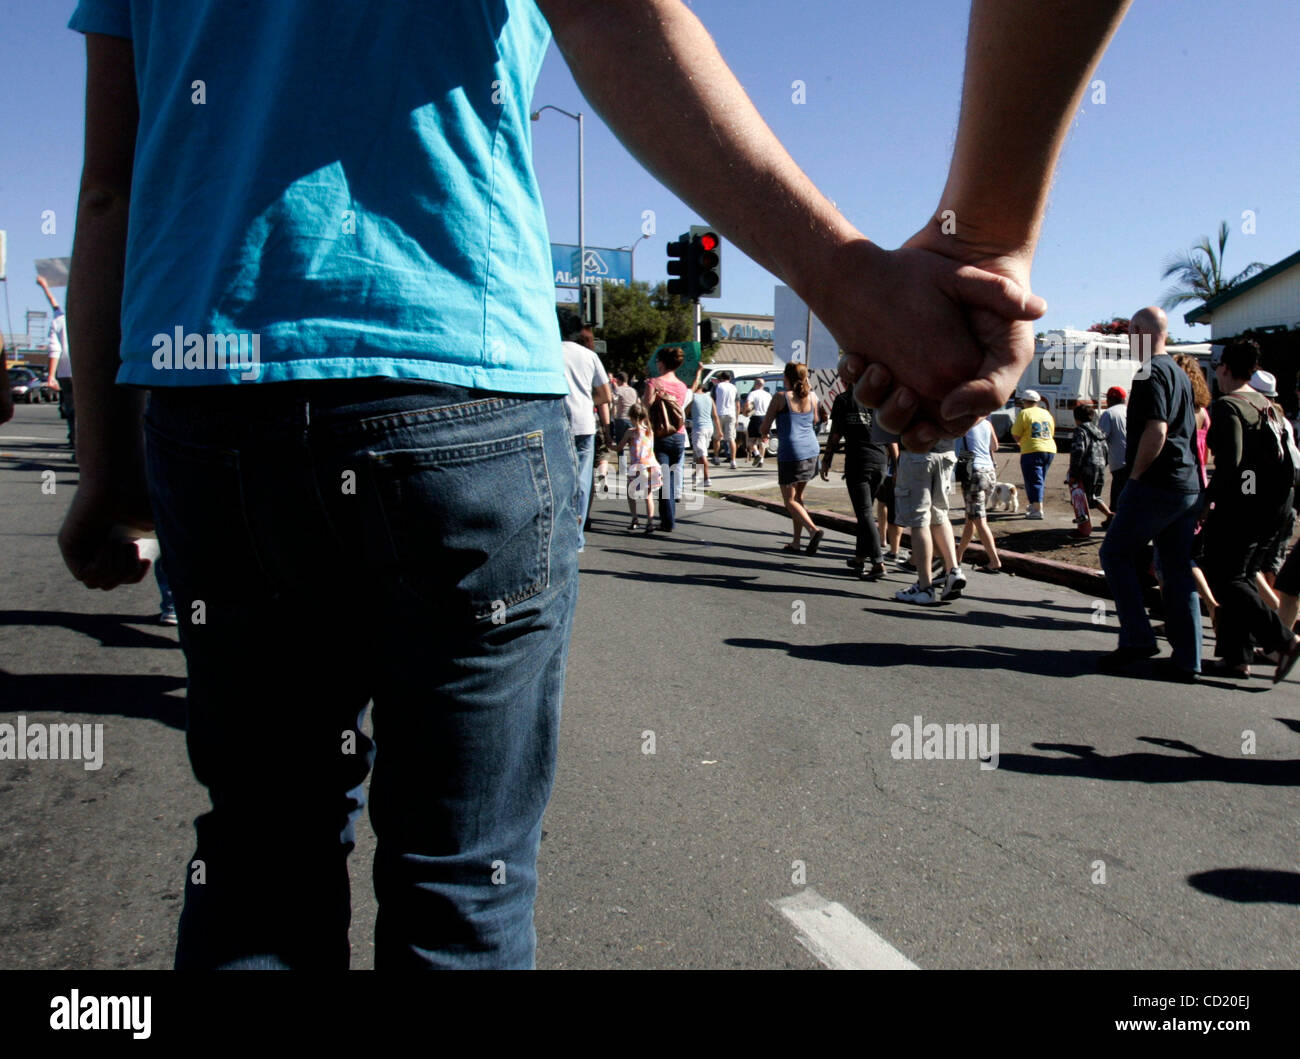 November 8, 2008 ALEX HEMPTON, left, holds hands with his partner DAN SULLIVAN, right, during a protest march on Saturday. Thousands of people turned out to protest the recently passed Prop 8 (ban on gay marriage) and marched nearly two miles (down University Avenue from Hillcrest to North Park), at Stock Photo